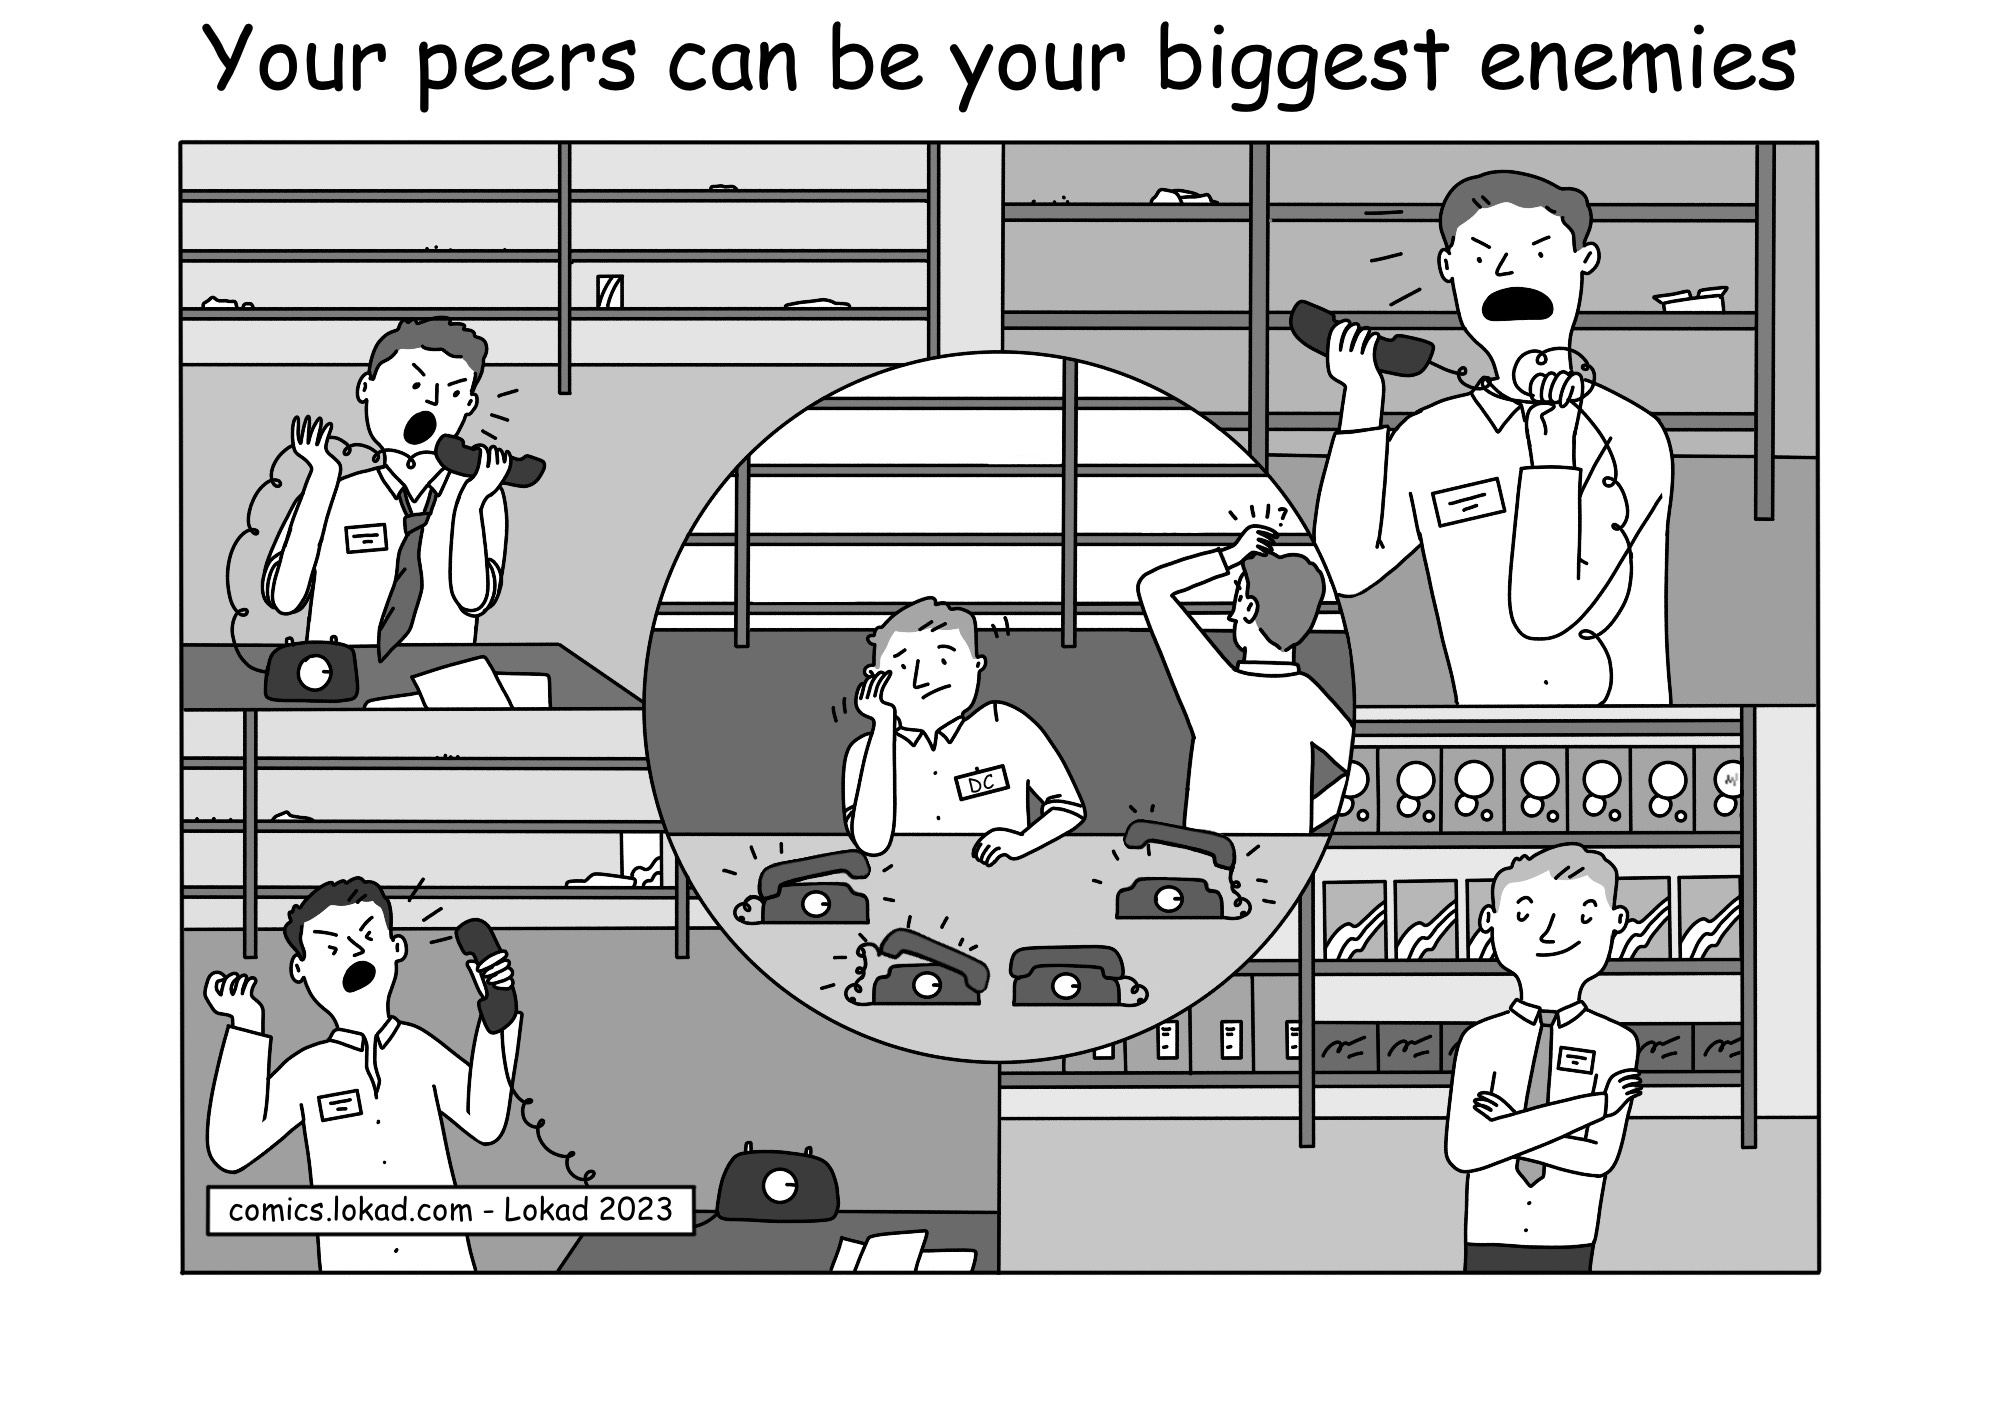 Comic from Lokad's supply chain series, titled 'Your peers can be your biggest enemies', features a warehouse scene with varying levels of activity in four different stores: one fully stocked and the other three facing stock shortages. Three store managers are depicted screaming into phones, exuding frustration and stress. In the central circular inset, a warehouse manager appears concerned amidst a flurry of ringing phones. The illustration highlights the adverse effects of inadequate communication and coordination among colleagues during stock shortages.